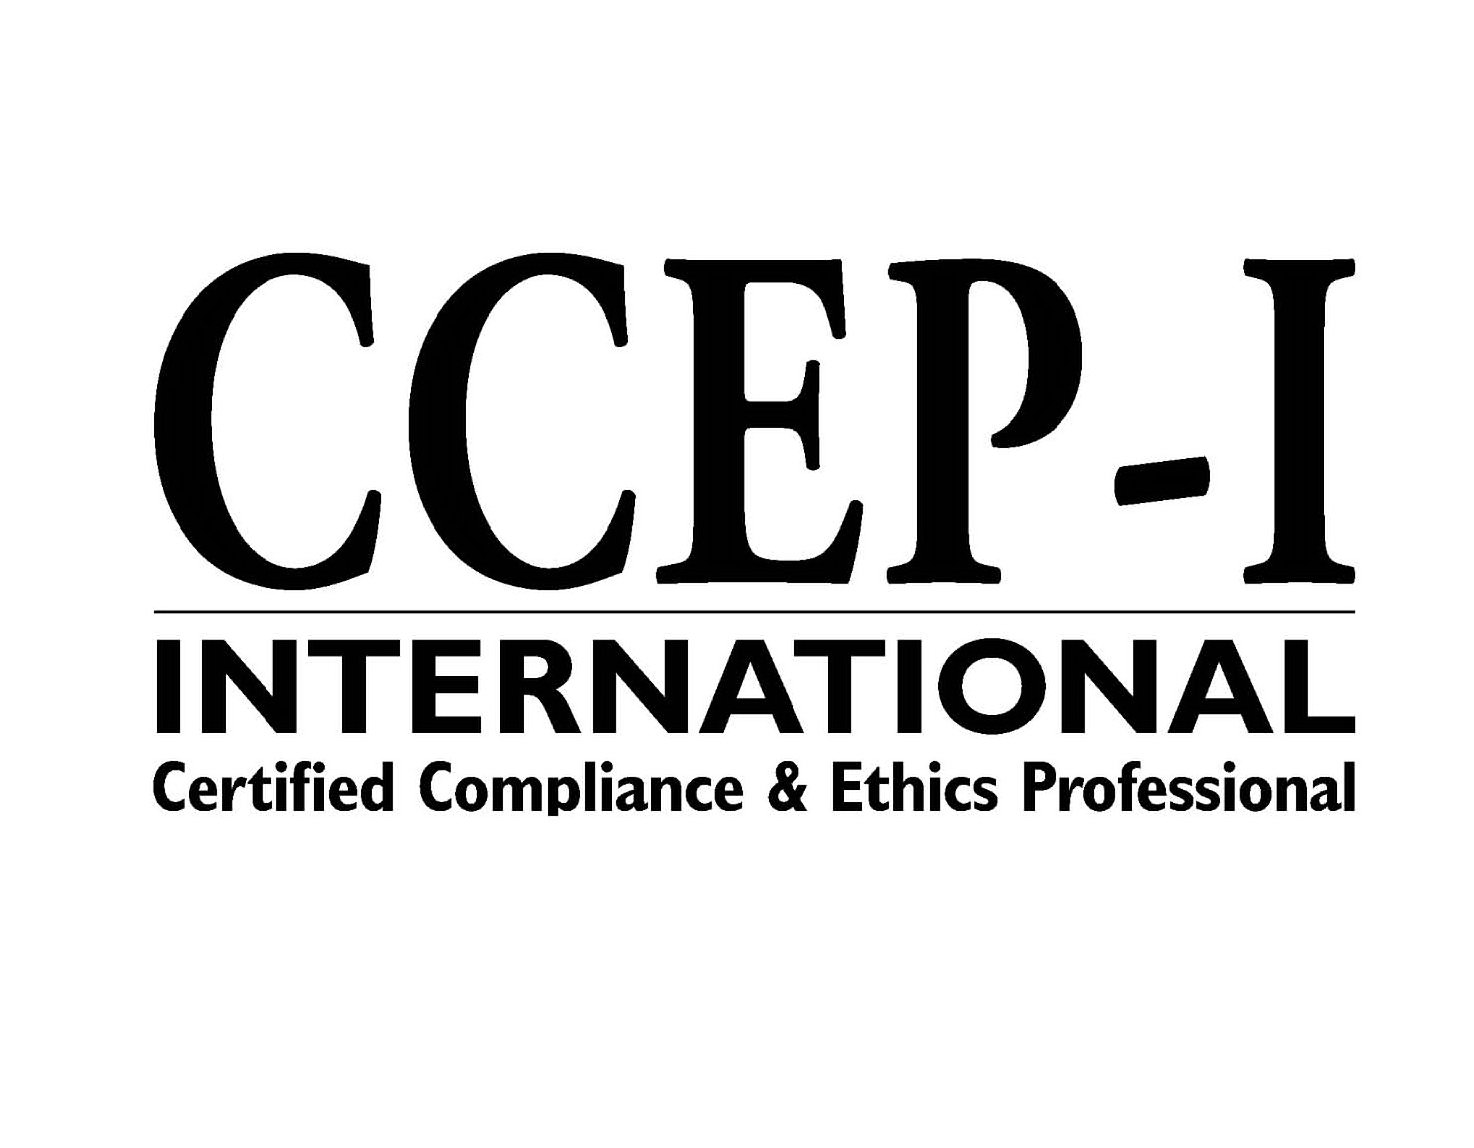  CCEP-I INTERNATIONAL CERTIFIED COMPLIANCE &amp; ETHICS PROFESSIONAL